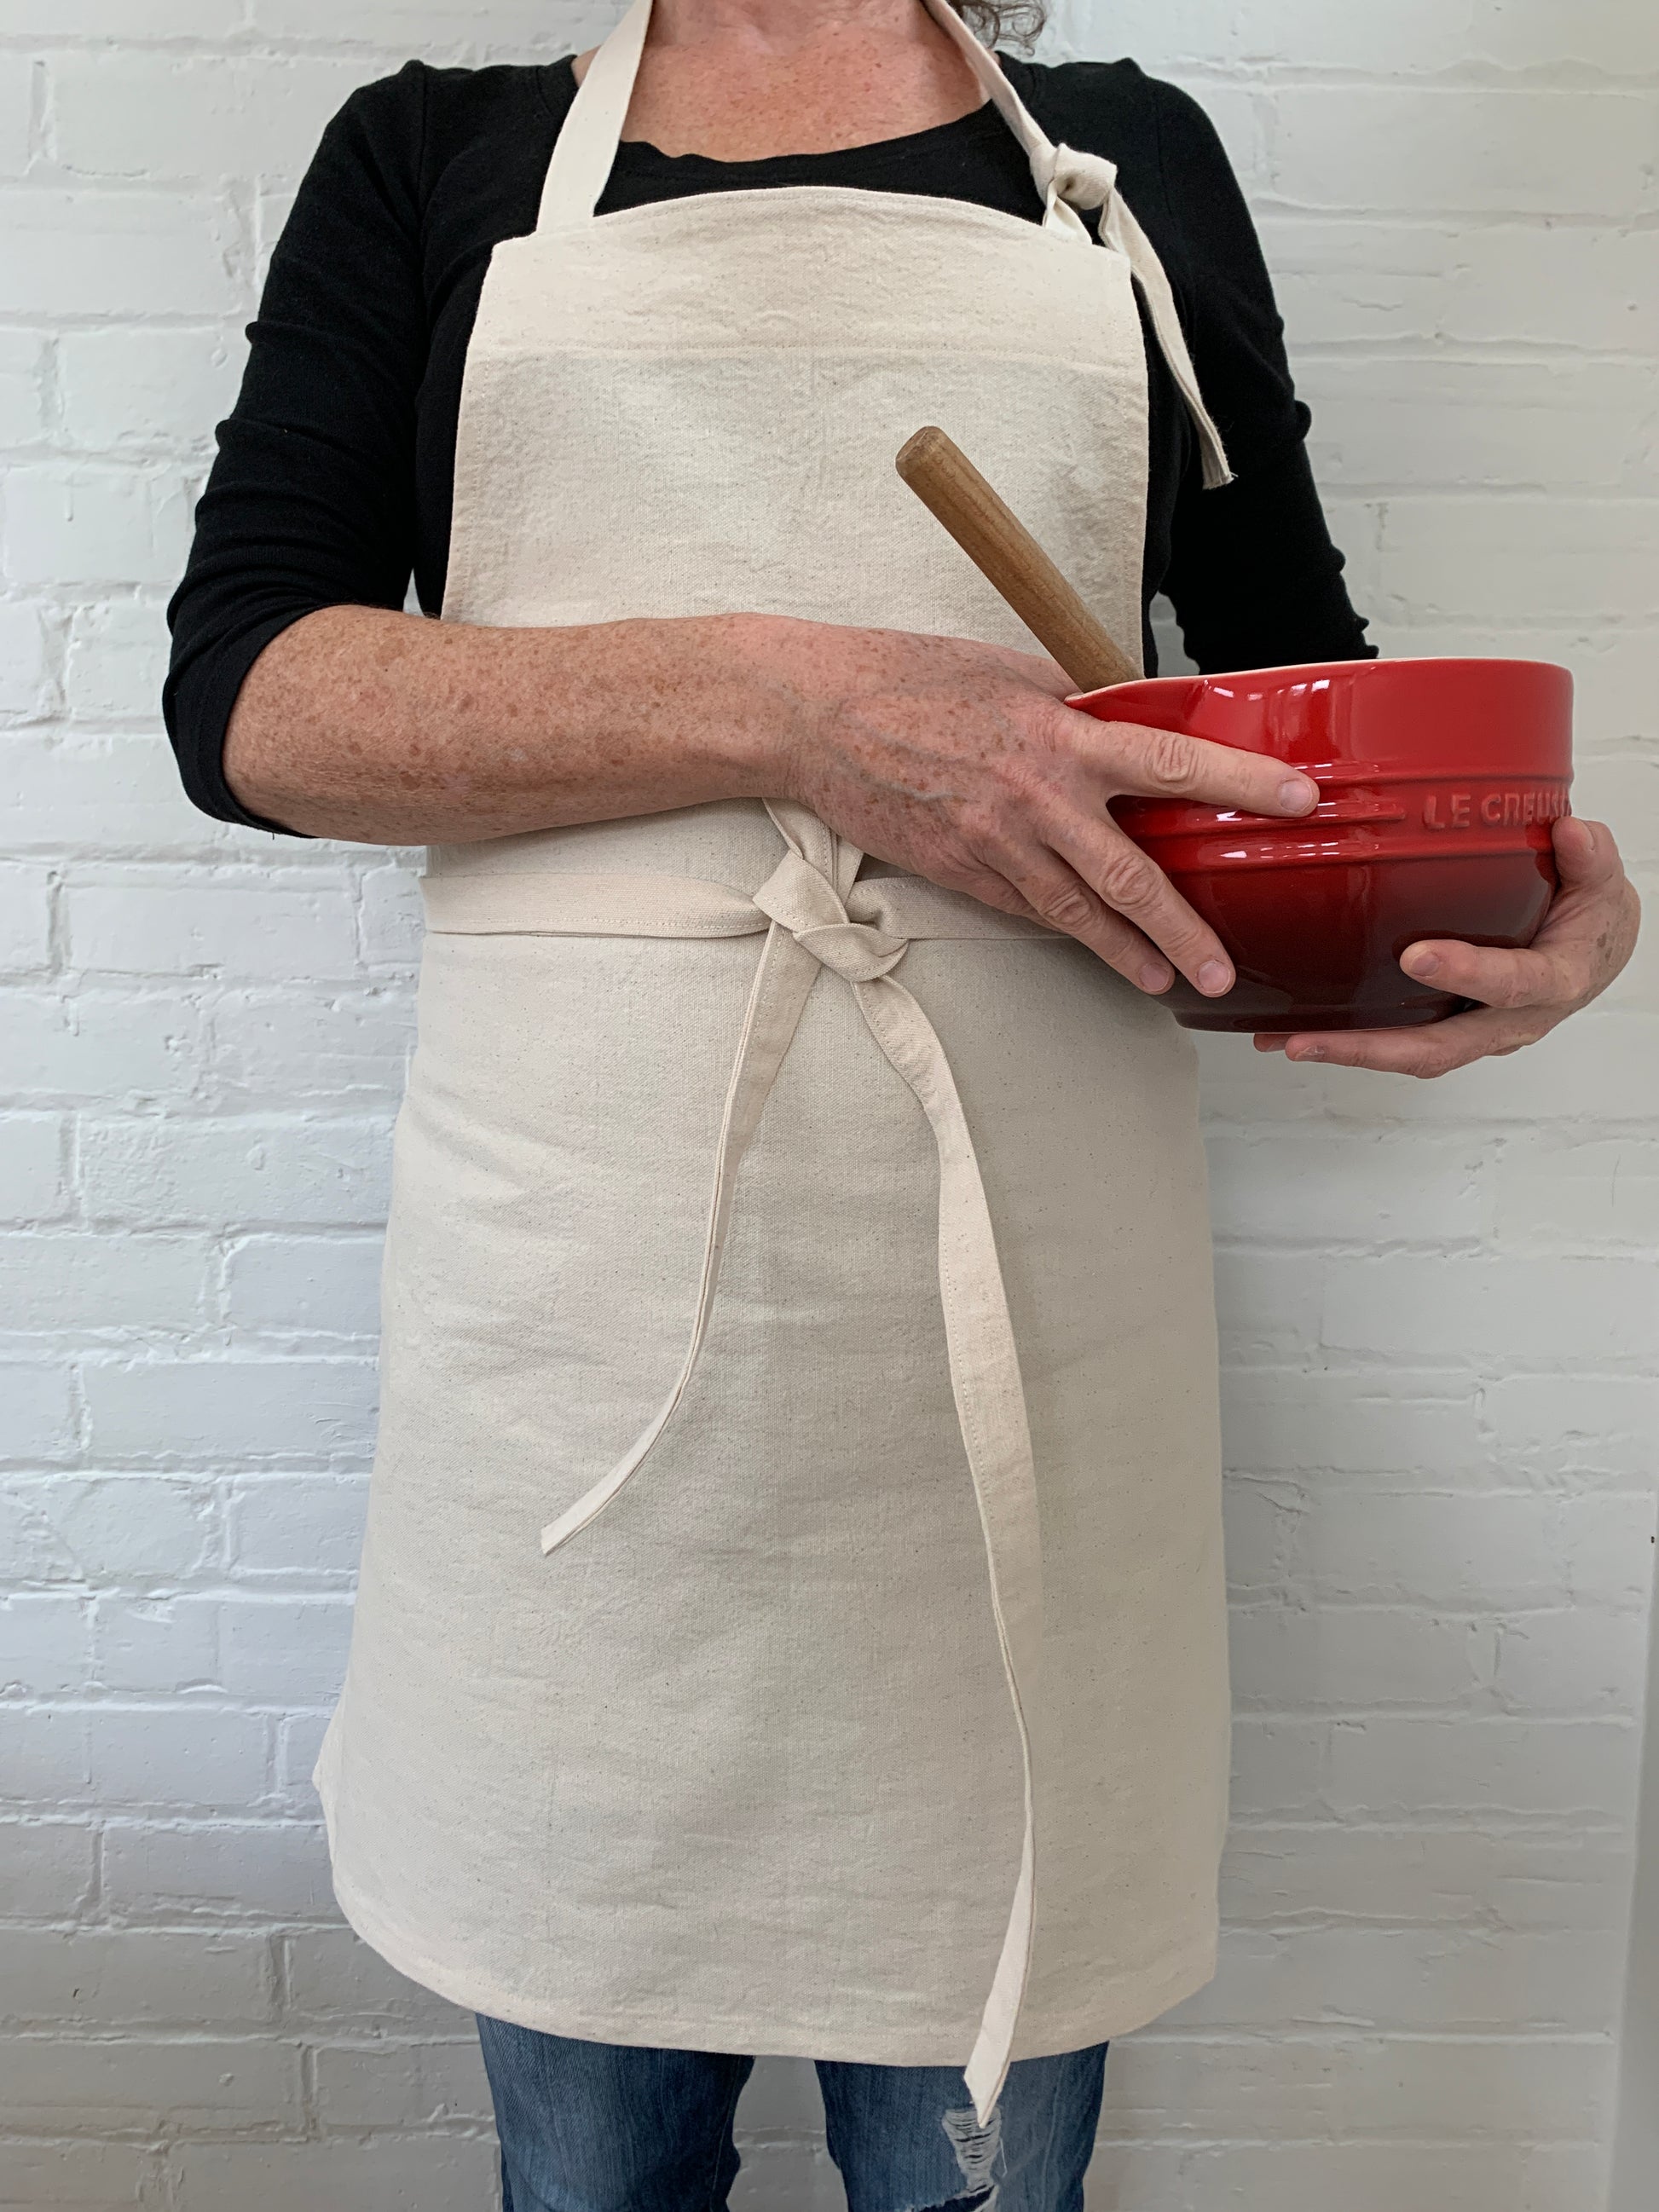 Woman wearing cotton canvas apron and holding red mixing bowl